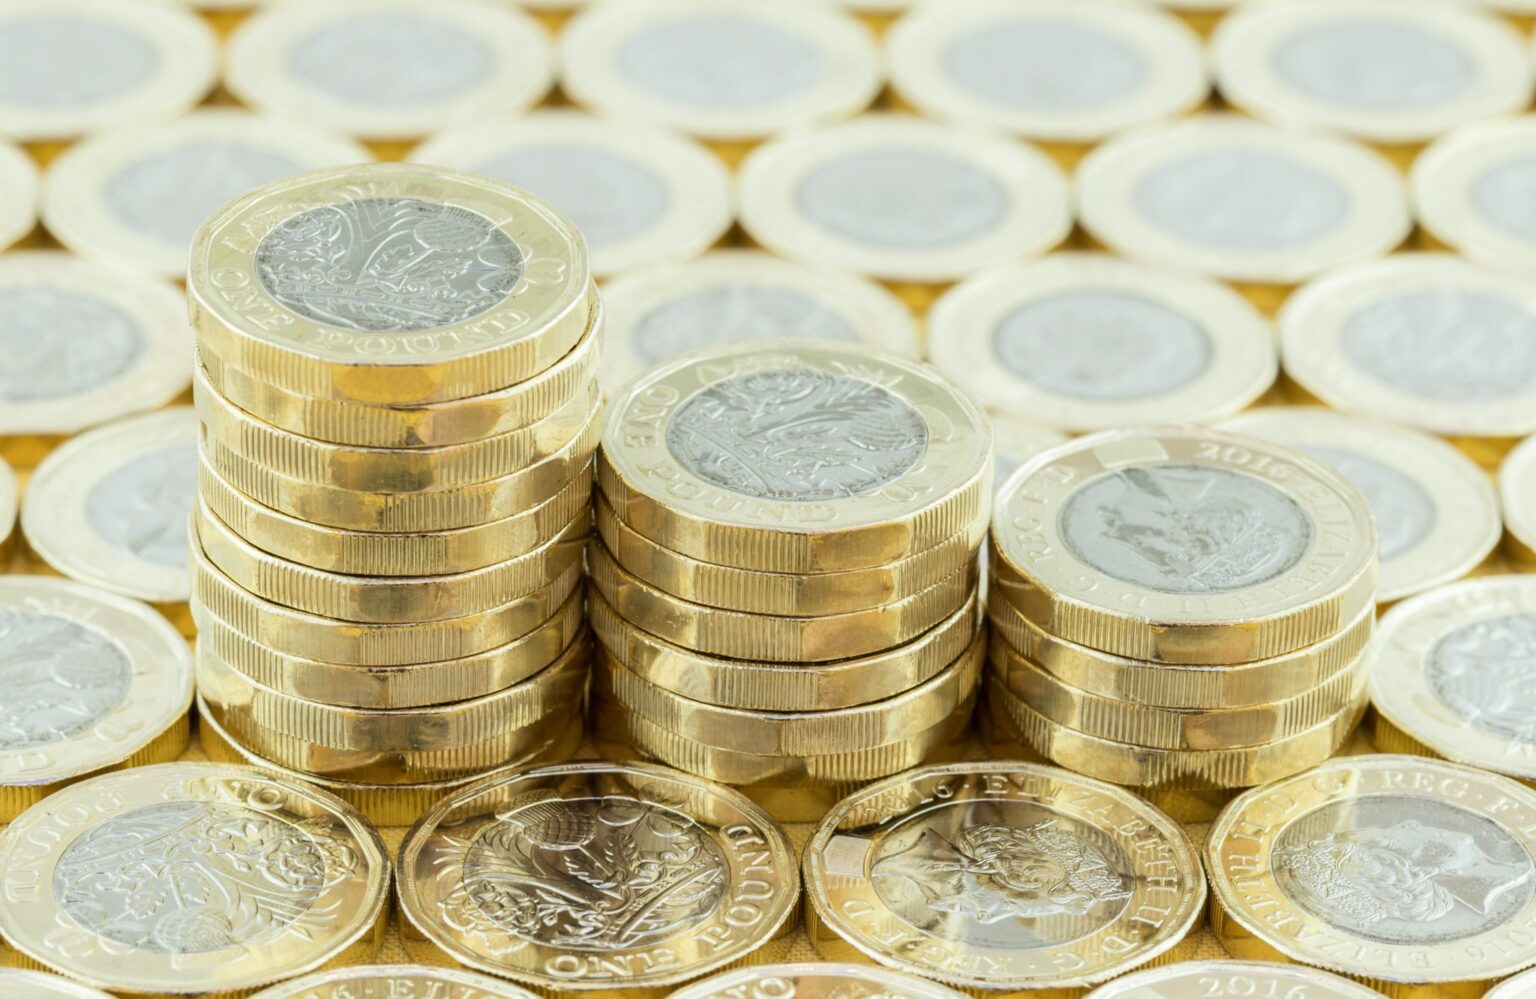 British money, new pound coins in three stacks on a background of more money. New one pound coins introduced in 2017